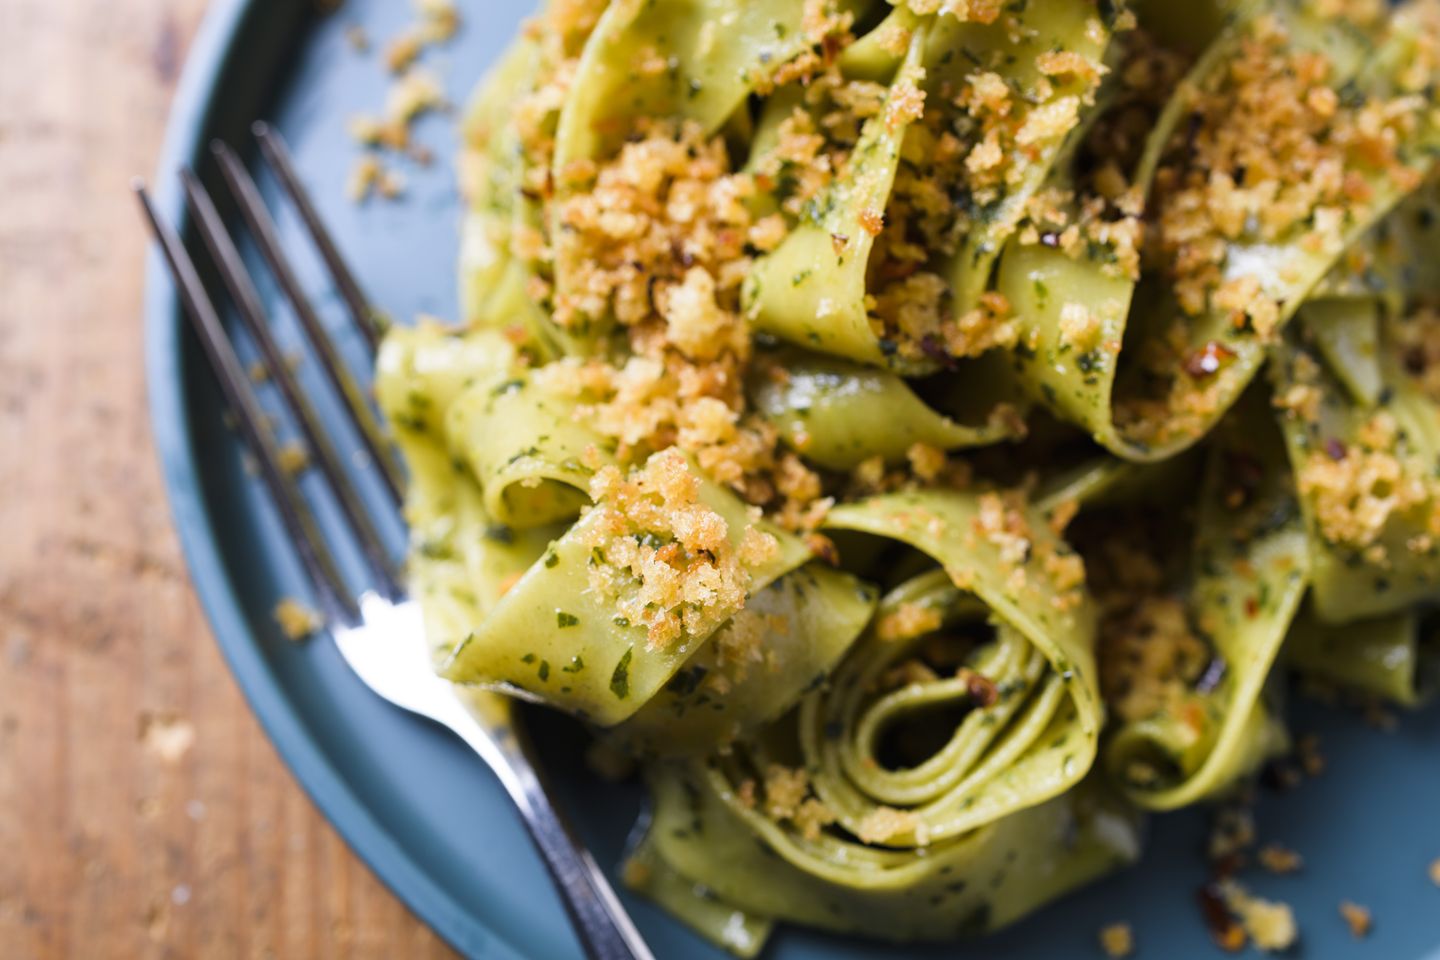 RECIPE: Pappardelle with basil, anchovy and toasted breadcrumbs